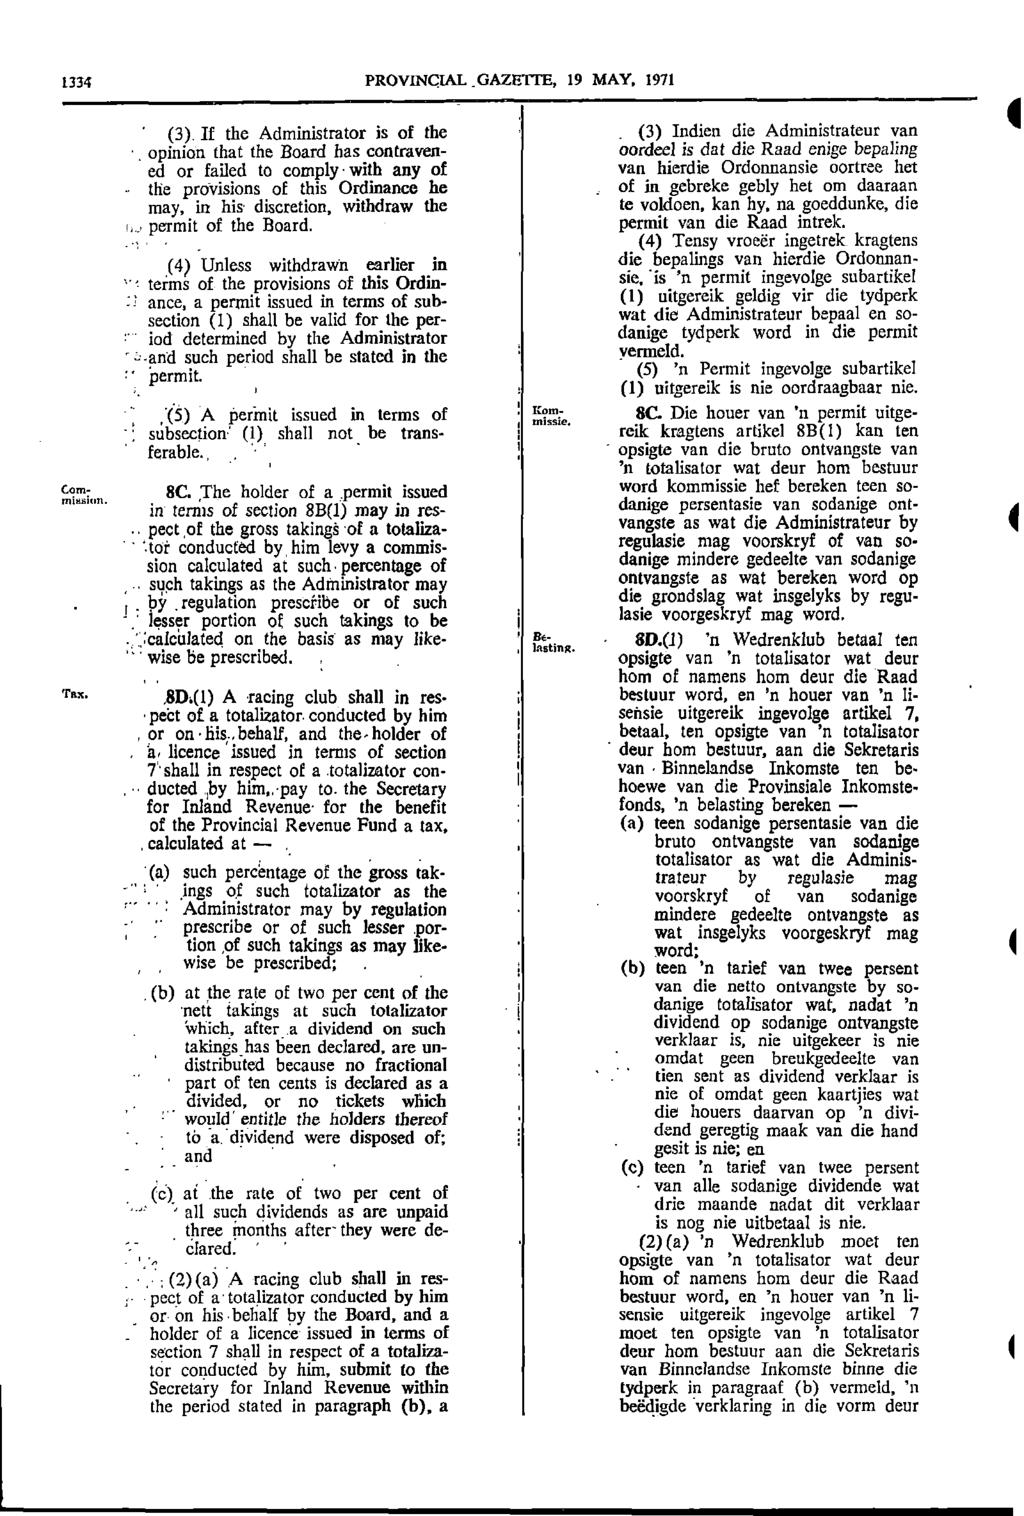 1334 PROVINCIAL _GAZETTE 19 MAY 1971 (3) If the Administrator is of the (3) Indien die Administrateur van opinion that the Board has contraven corded is dat die Raad enige bepaling ed or failed to